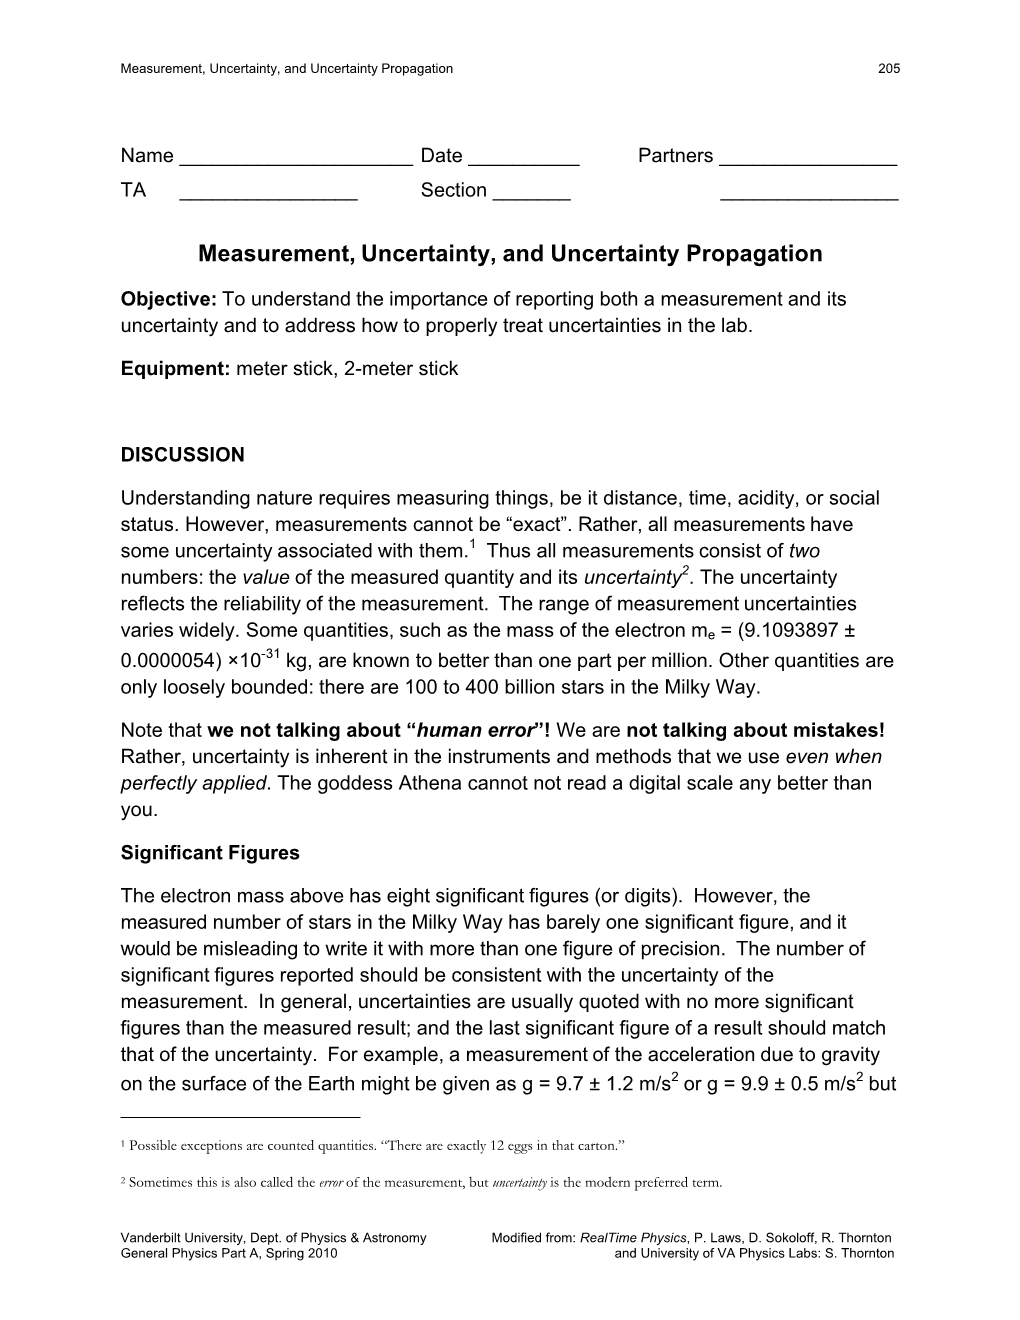 Measurement, Uncertainty, and Uncertainty Propagation 205